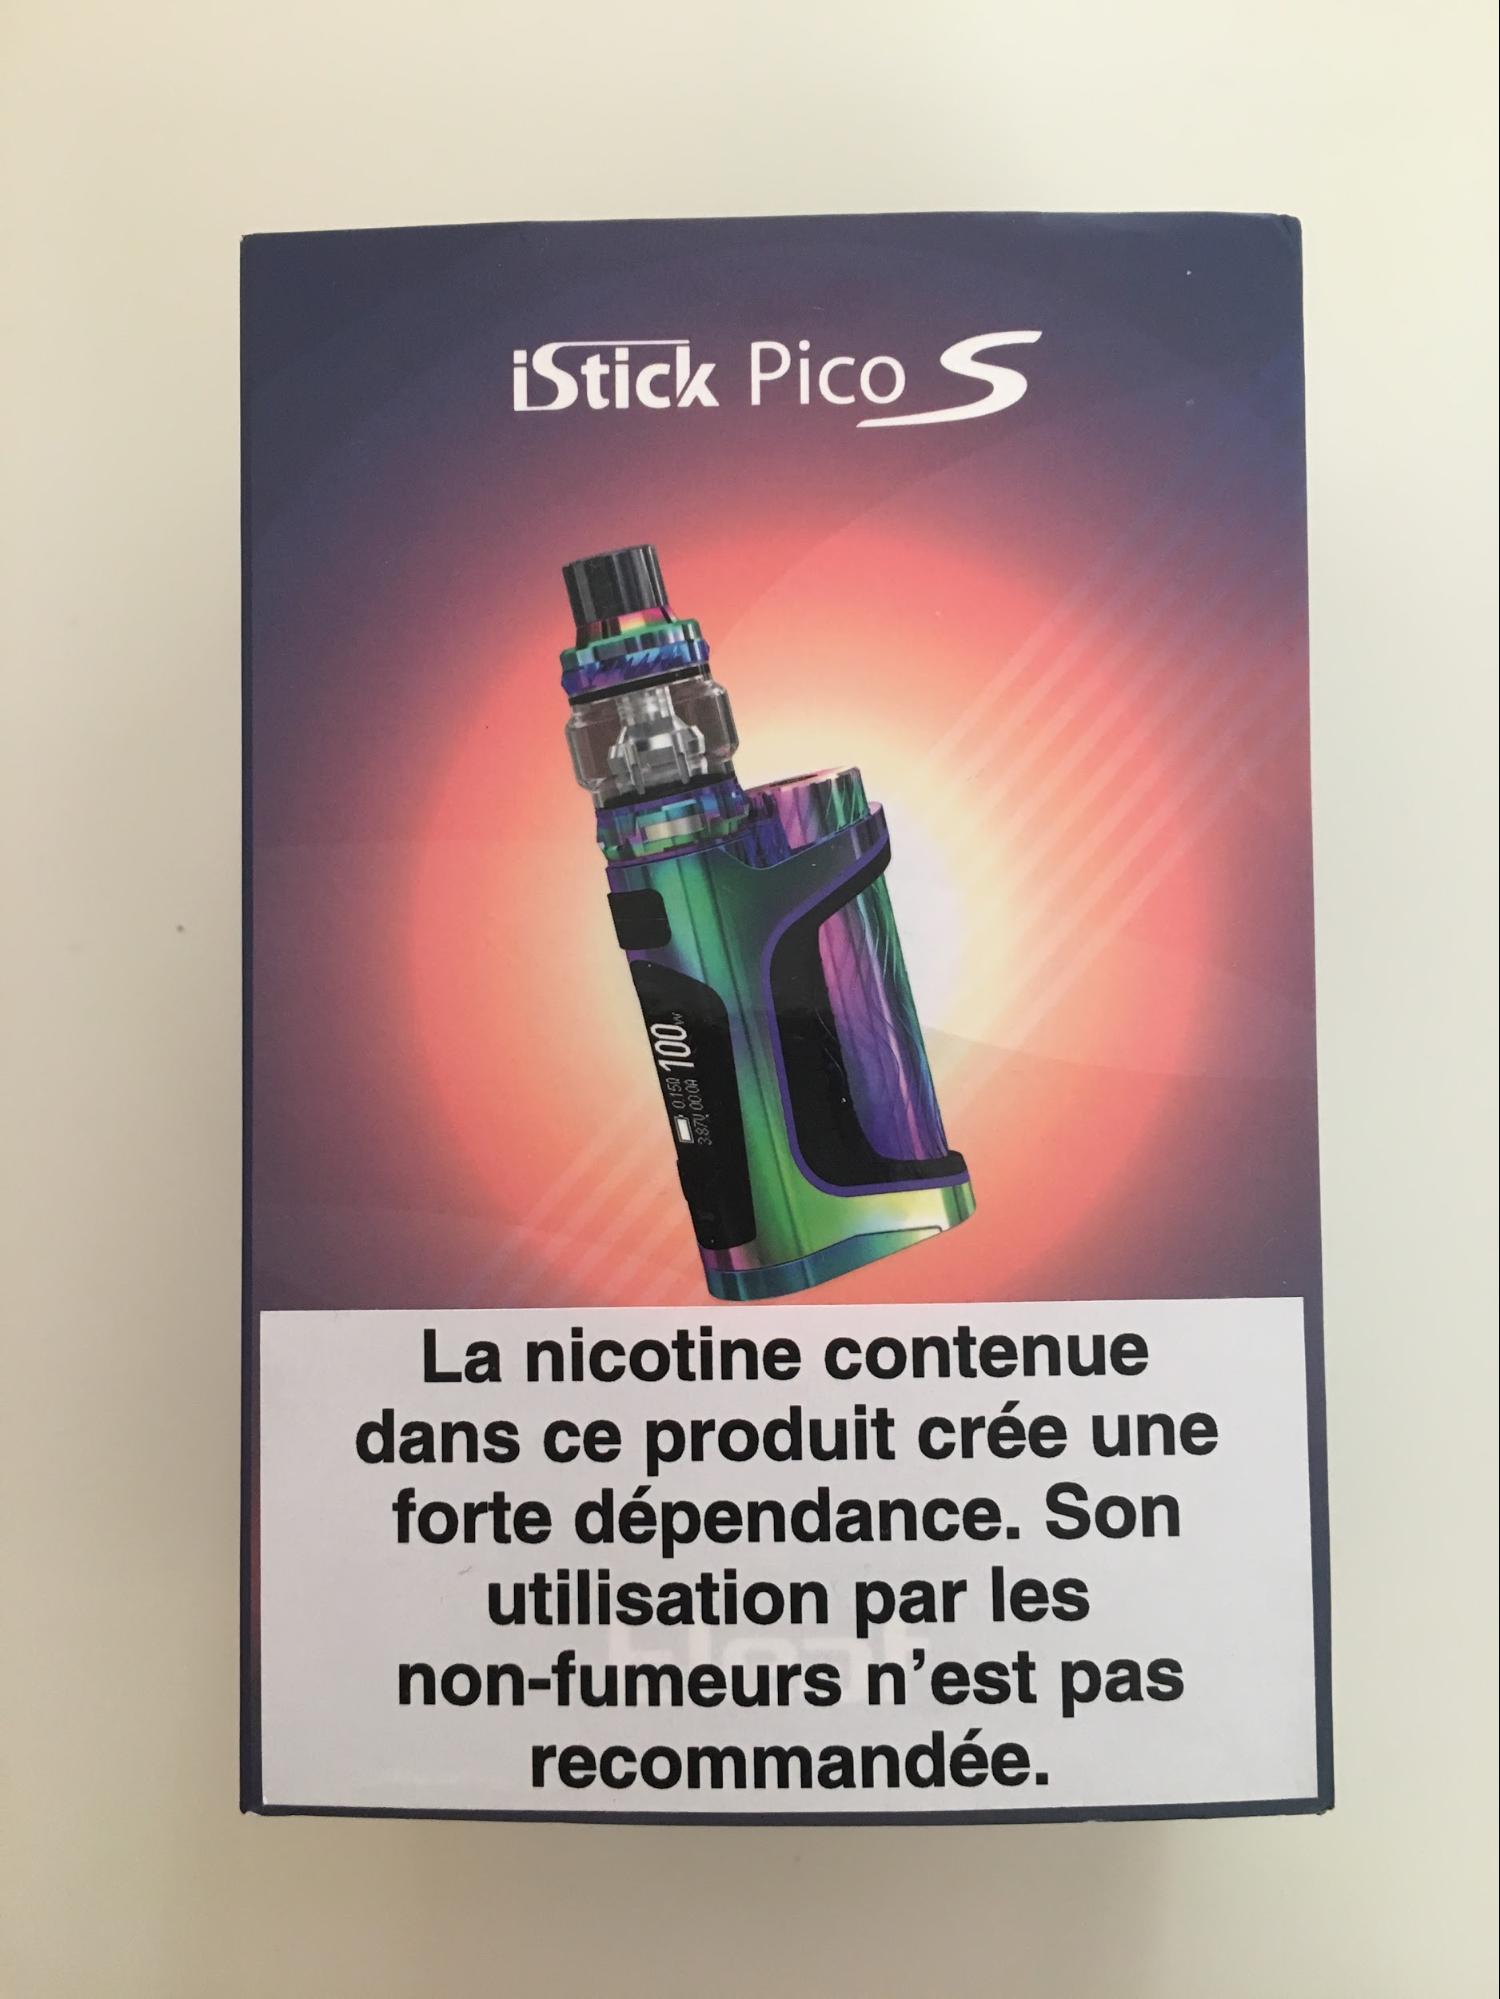 Packaging Istick Pico S